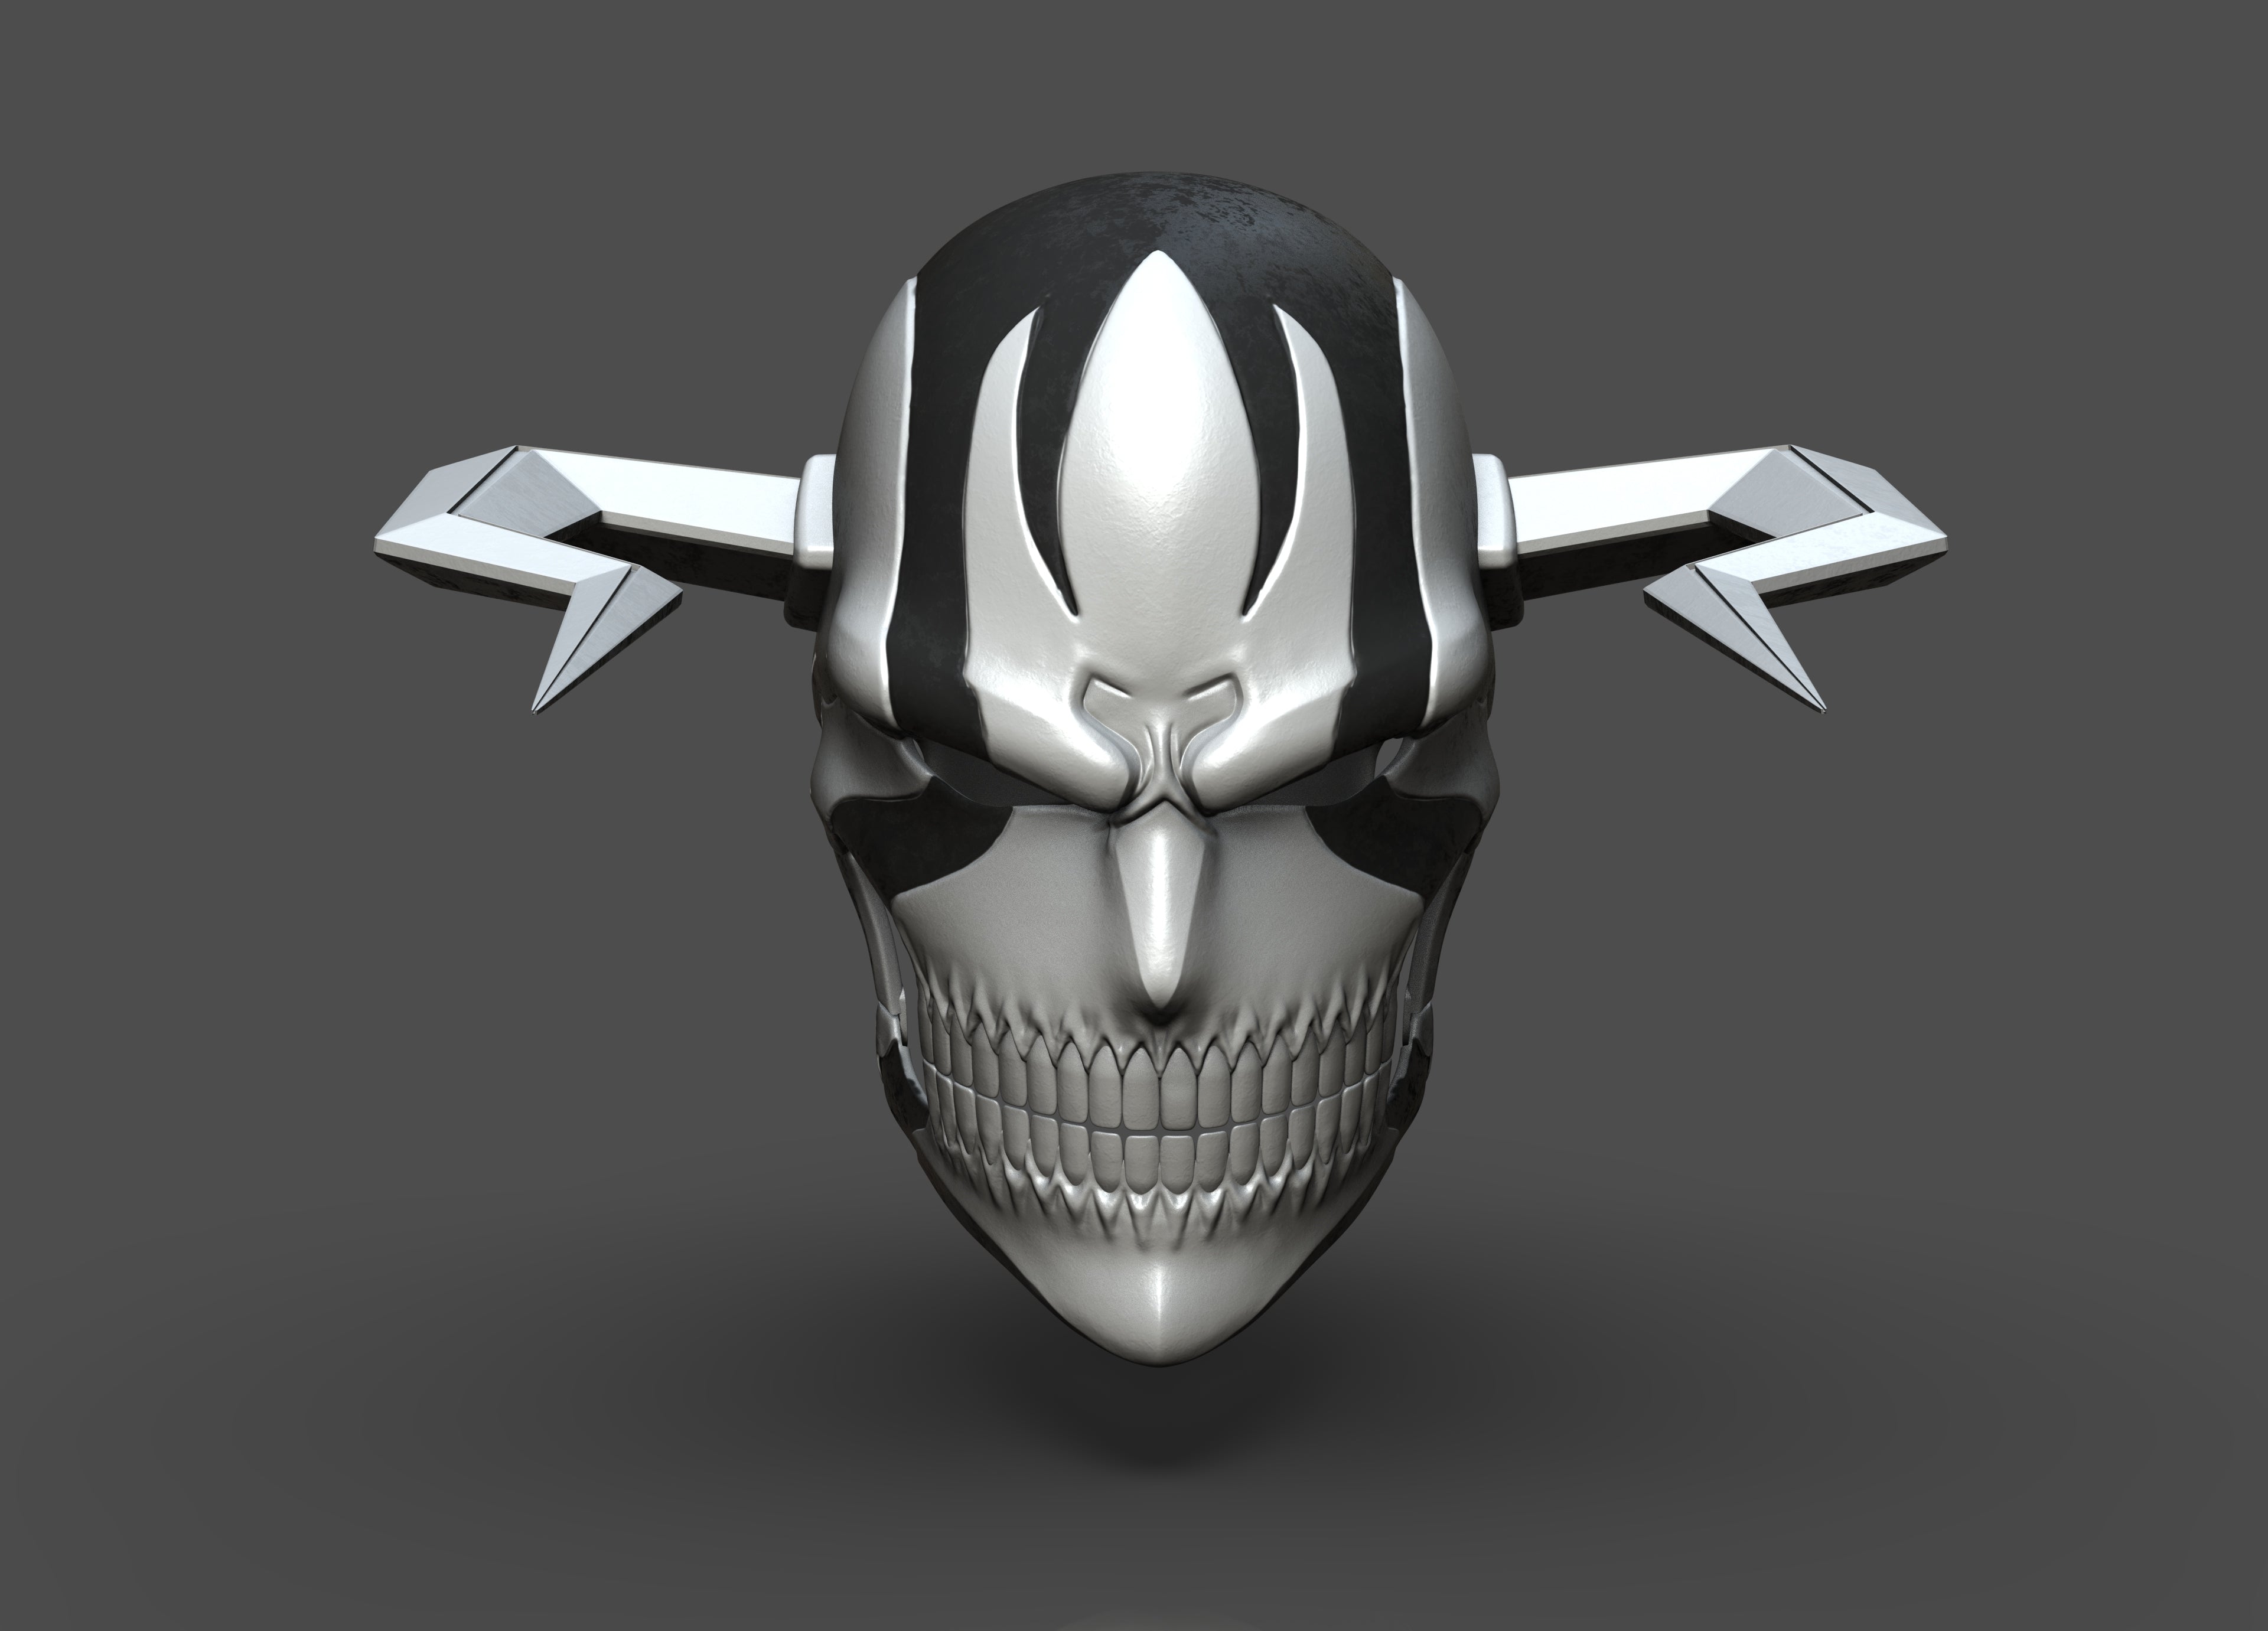 Vasto Lorde Mask - Download Free 3D model by EvelynnTheImmortal (@kcicak)  [6bf630a]